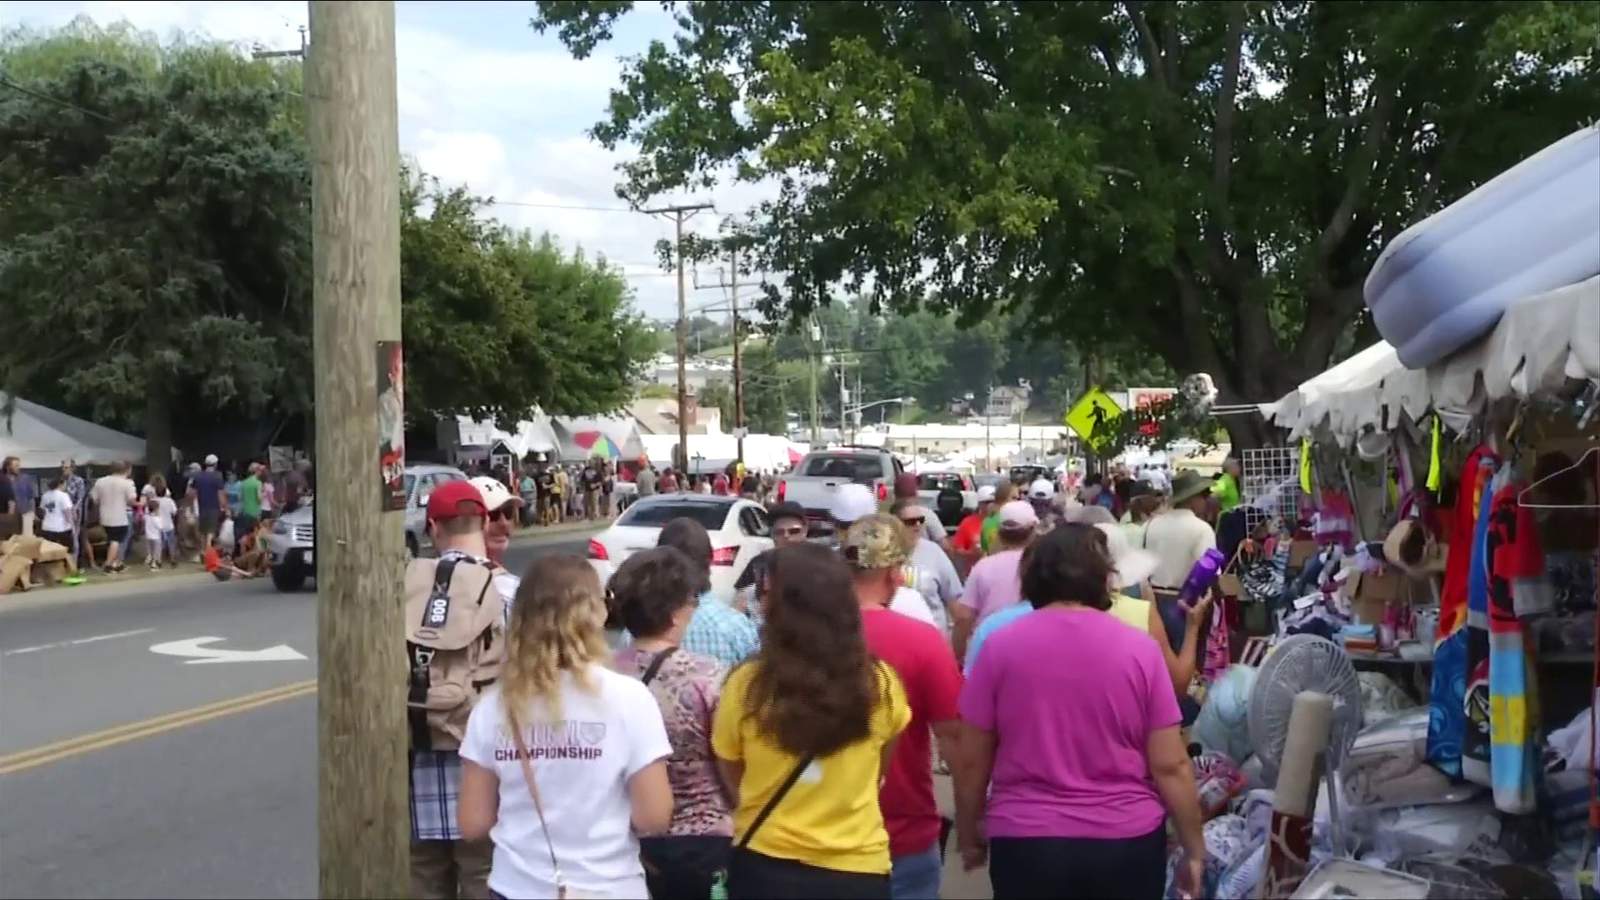 ‘It’s going to hurt a lot of people’: Town of Hillsville will not be issuing permits for annual flea market